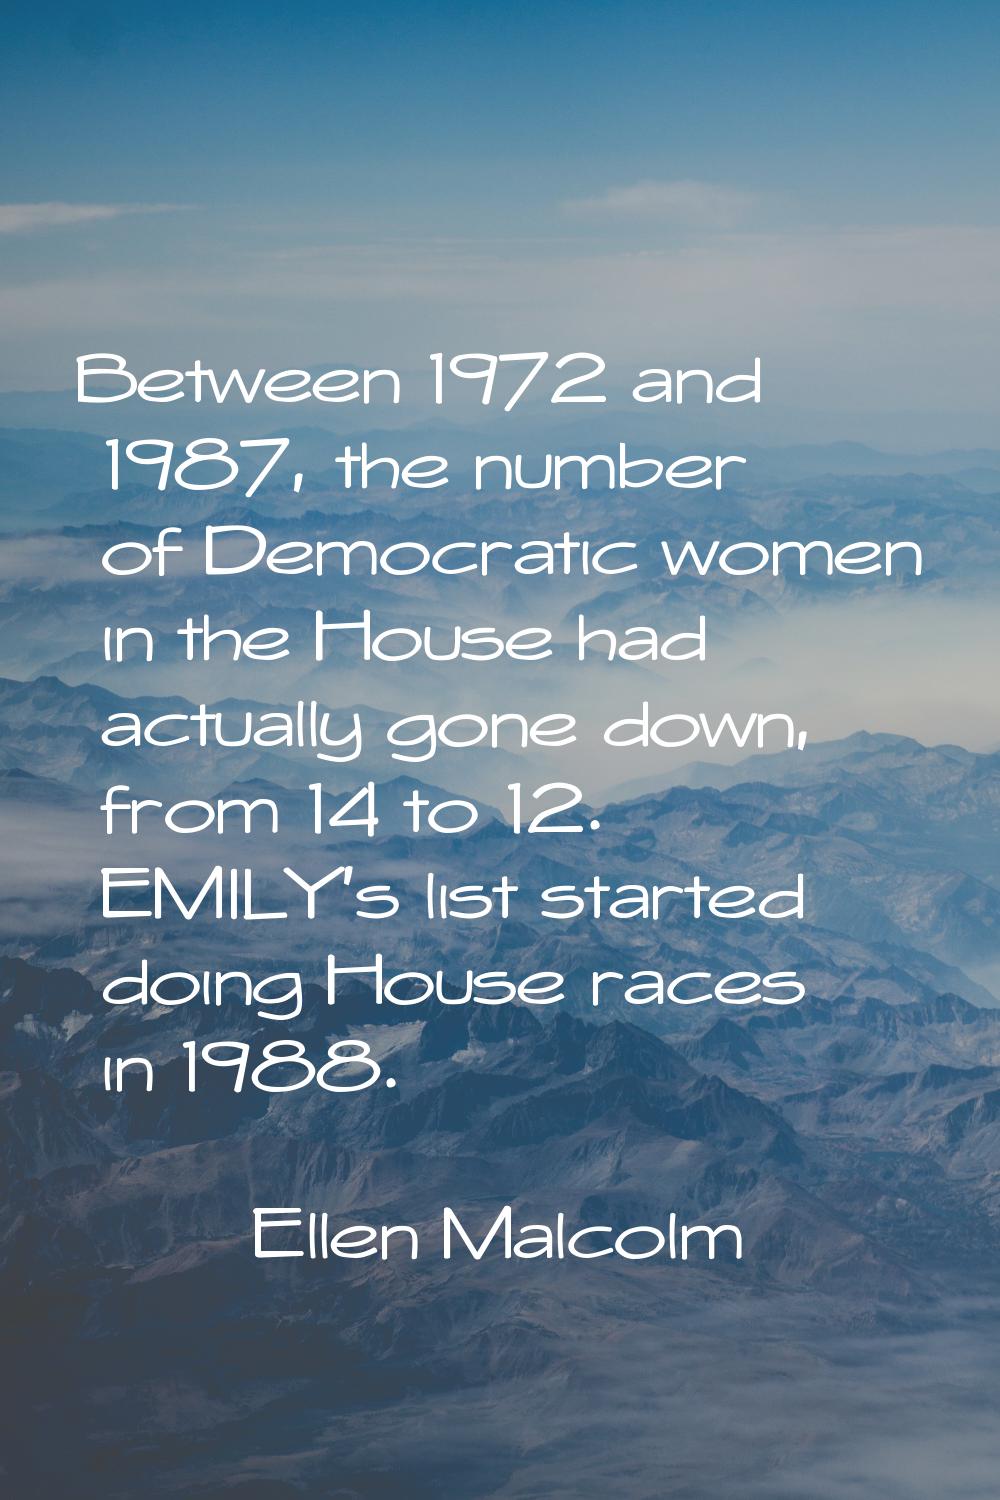 Between 1972 and 1987, the number of Democratic women in the House had actually gone down, from 14 